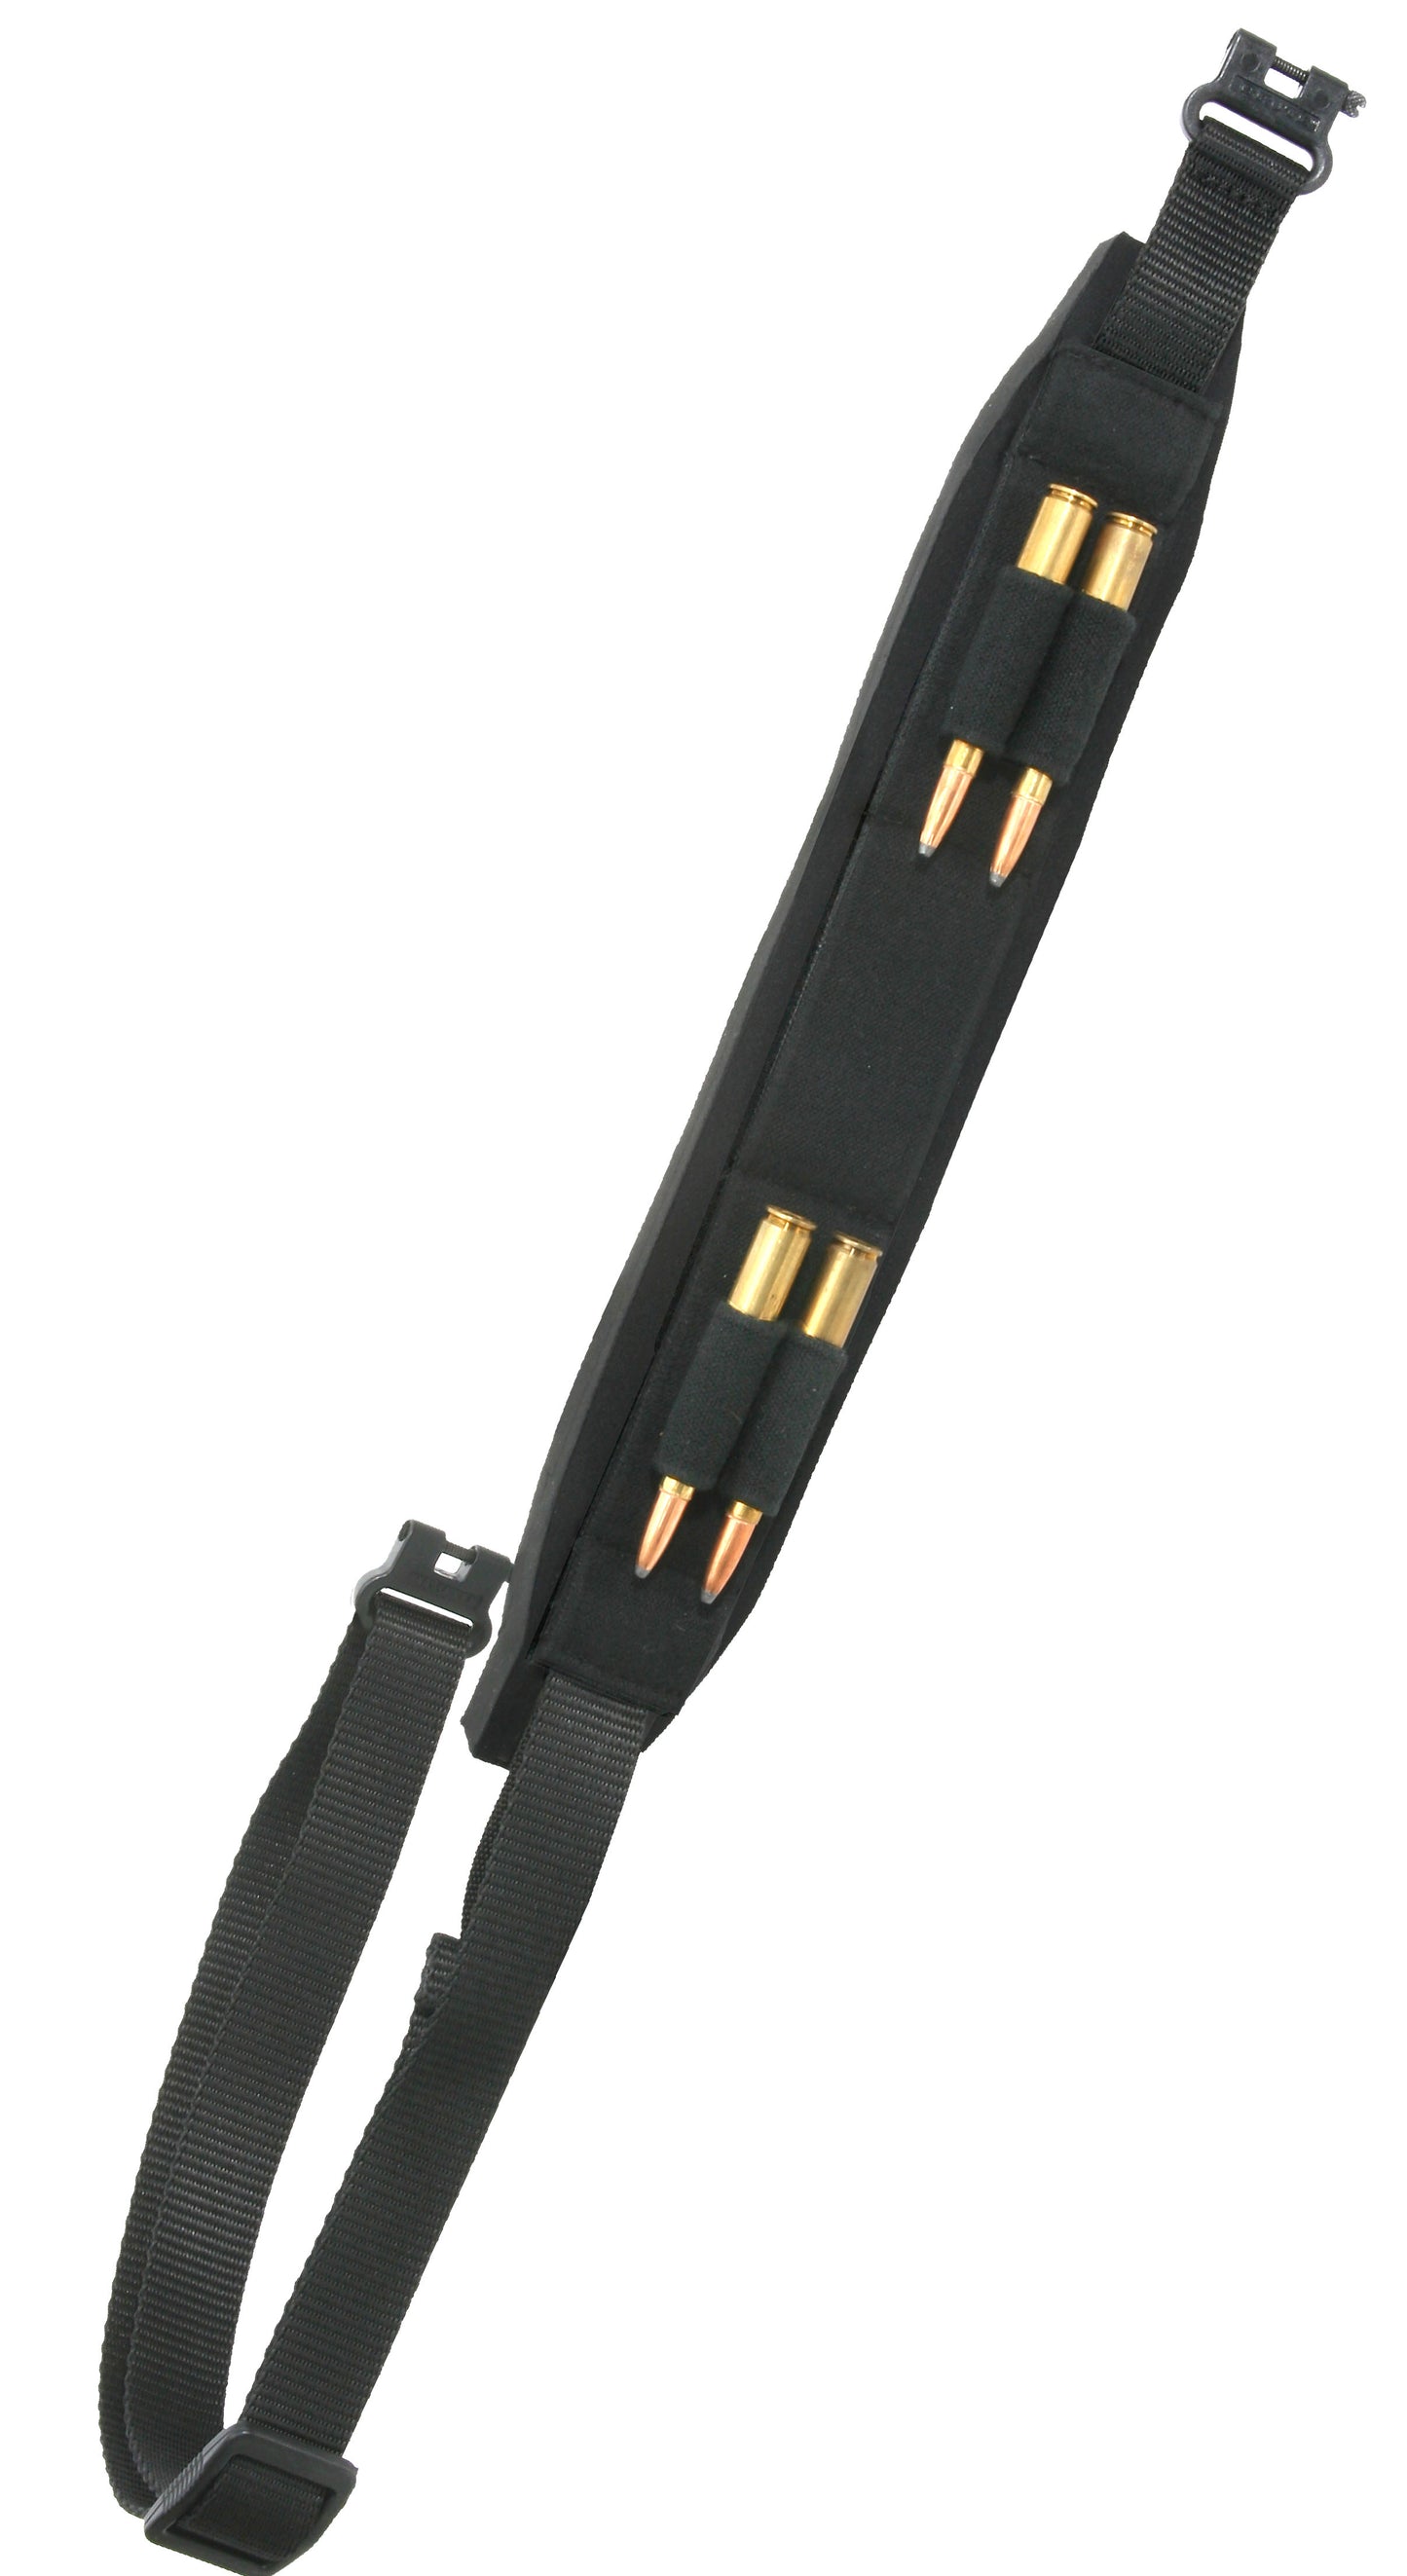 The Outdoor Connection Neo Magnum Sling